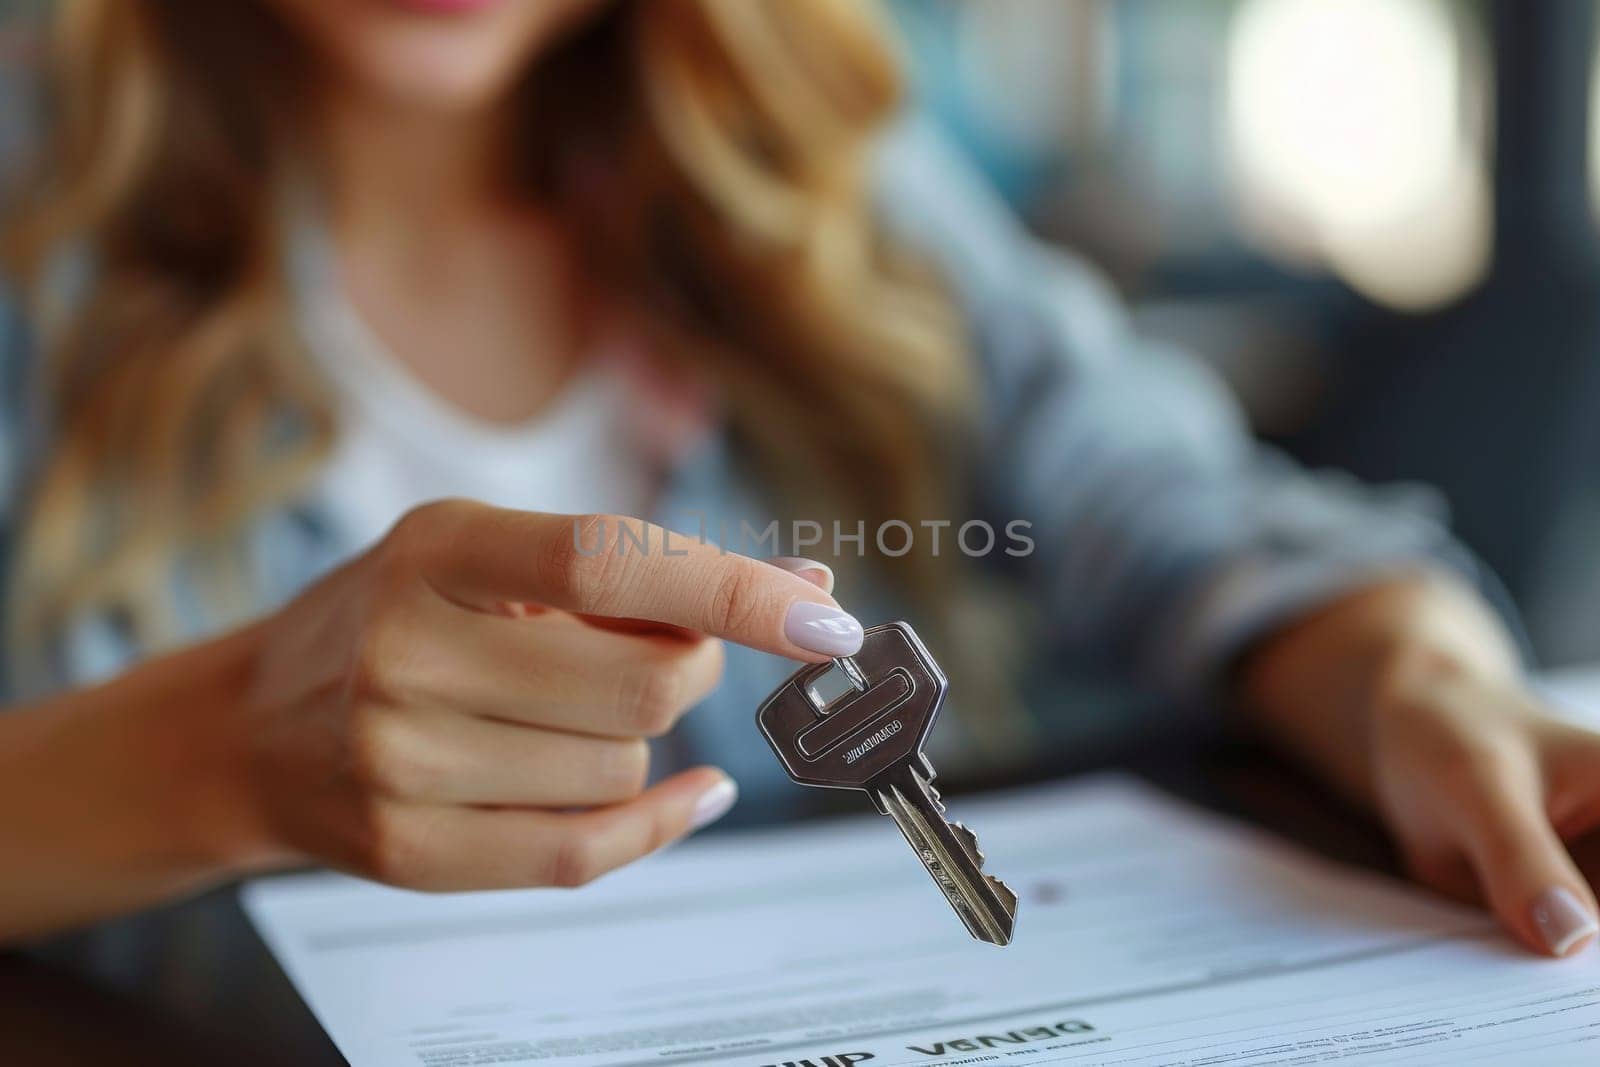 A woman is holding a key in her hand and pointing to a piece of paper by itchaznong